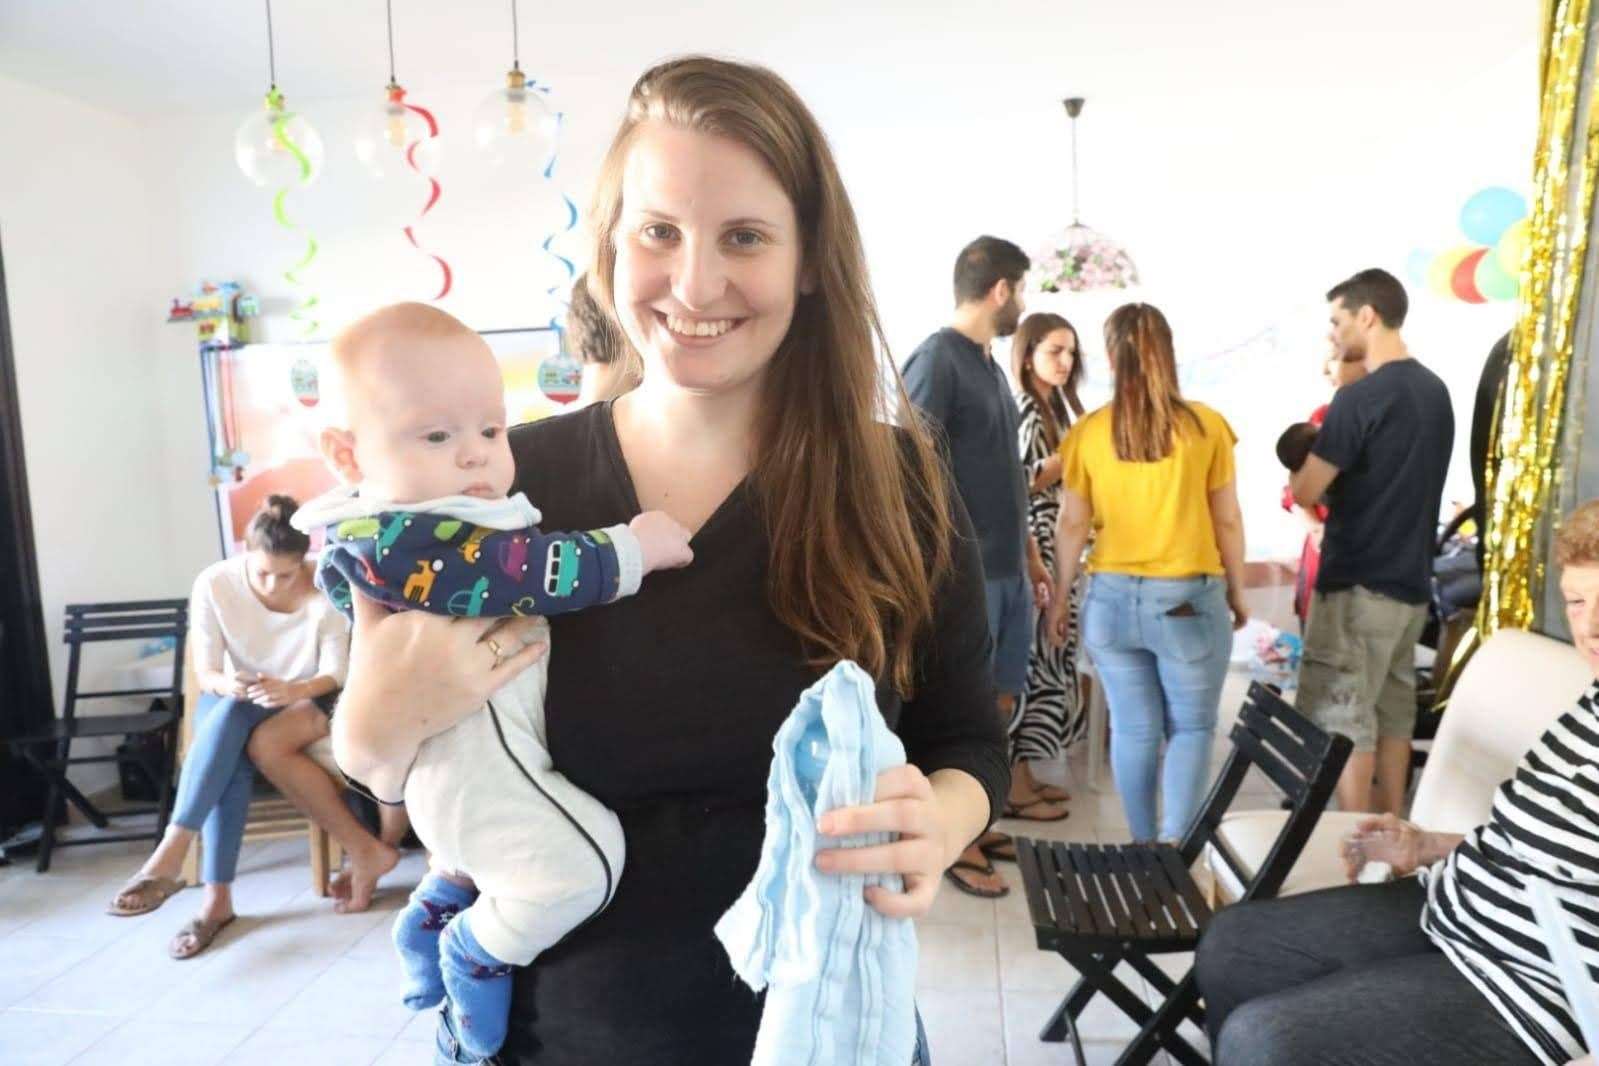 Ofri Bibas Levy’s sister-in-law Shiri Silberman Bibas with her son Kfir, who is missing along with her husband Jordan and other son Ariel, four (Family handout/PA)